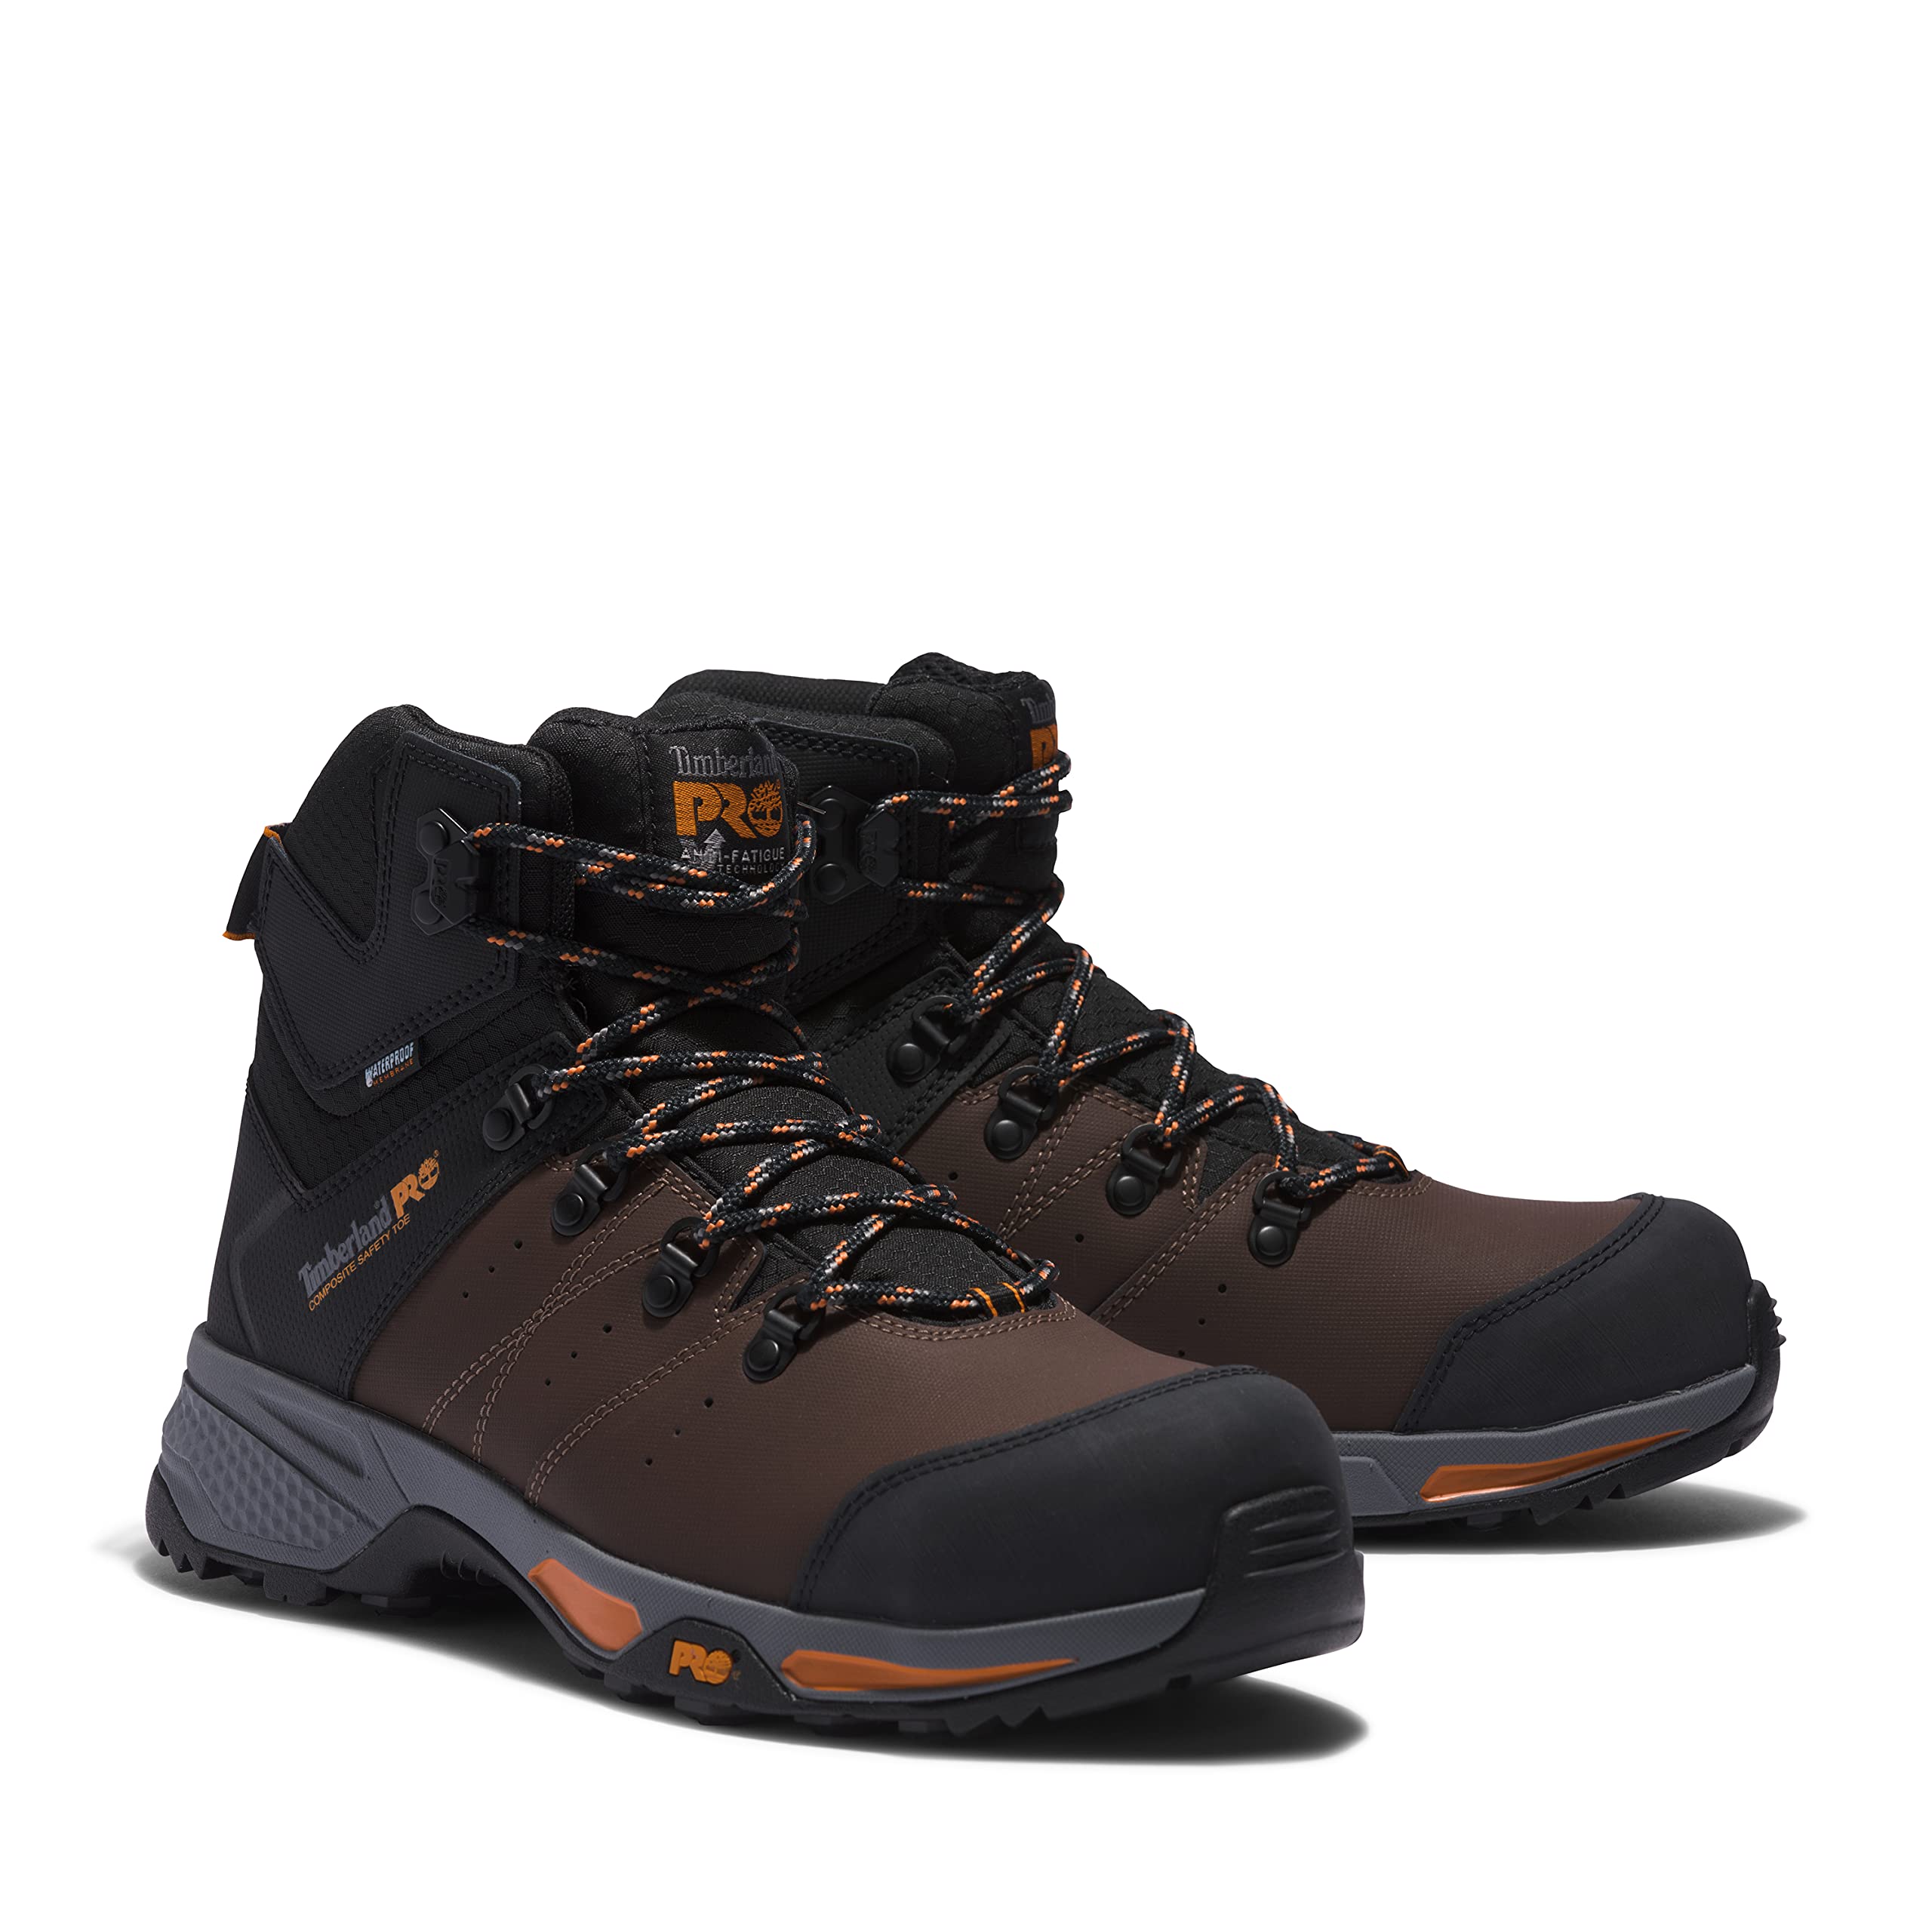 Timberland PRO Men's Switchback 6 Inch Composite Safety Toe Waterproof Industrial Hiker Work Boot